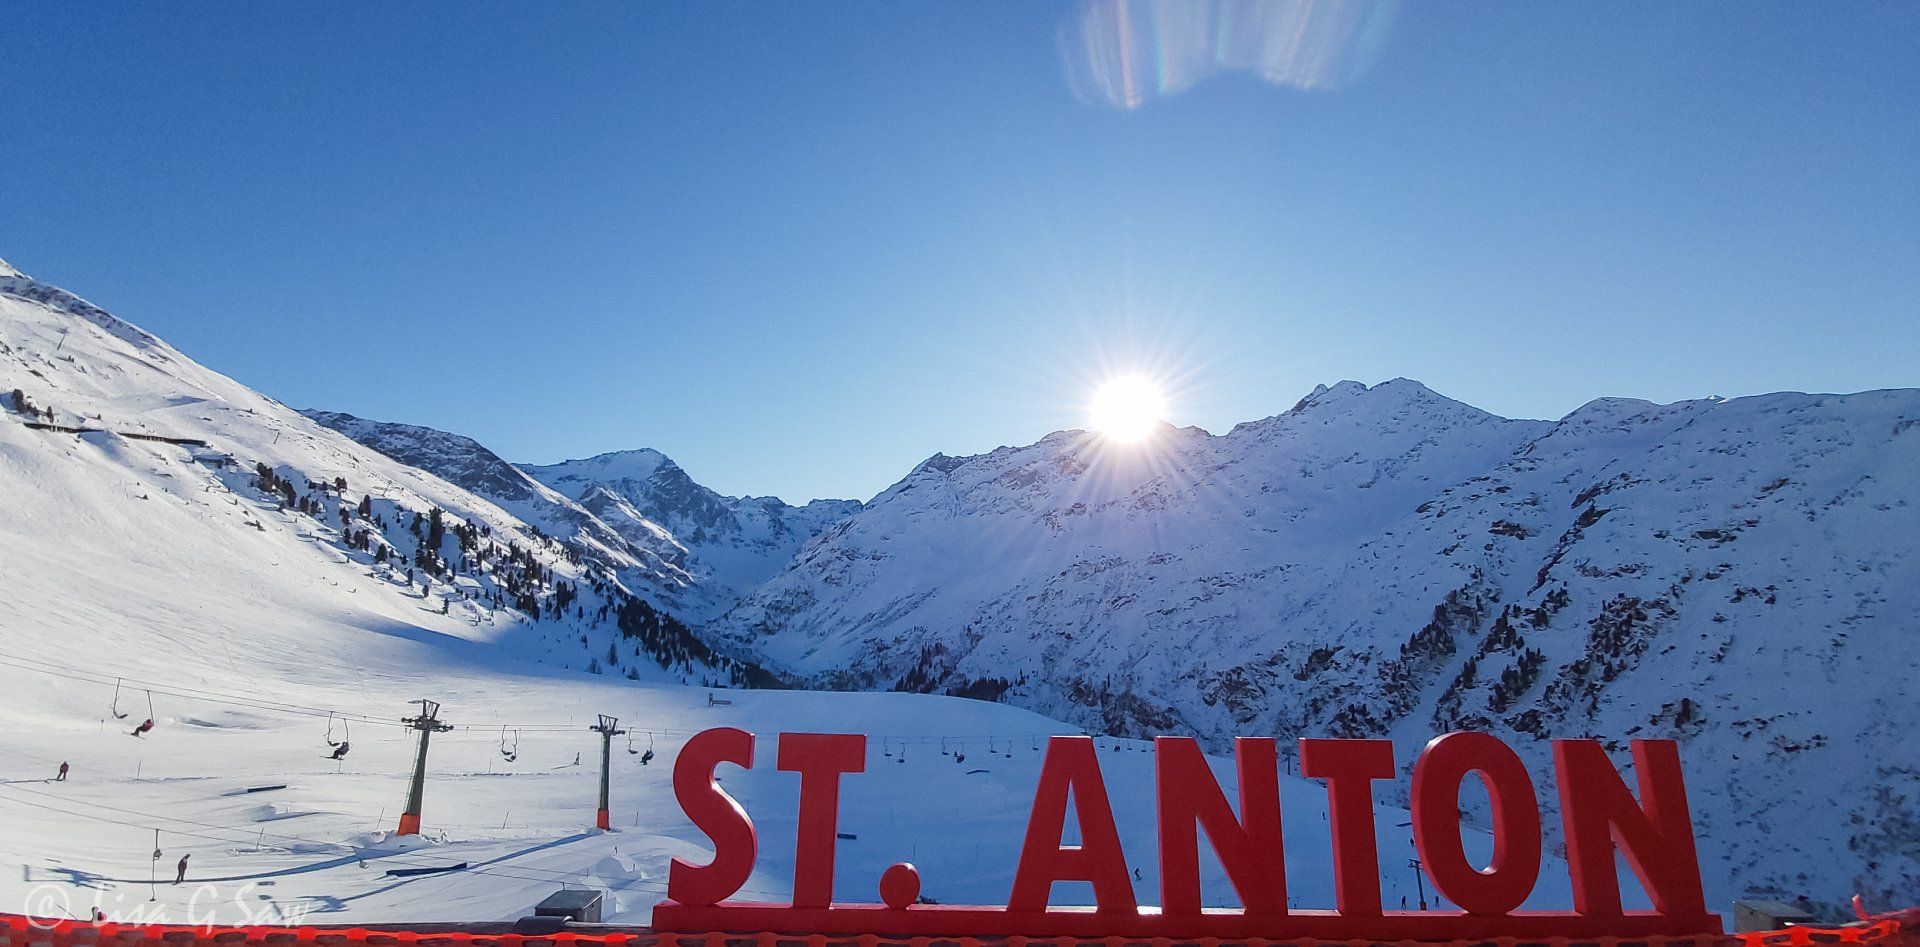 Sunburst behind snow capped mountains with St Anton sign